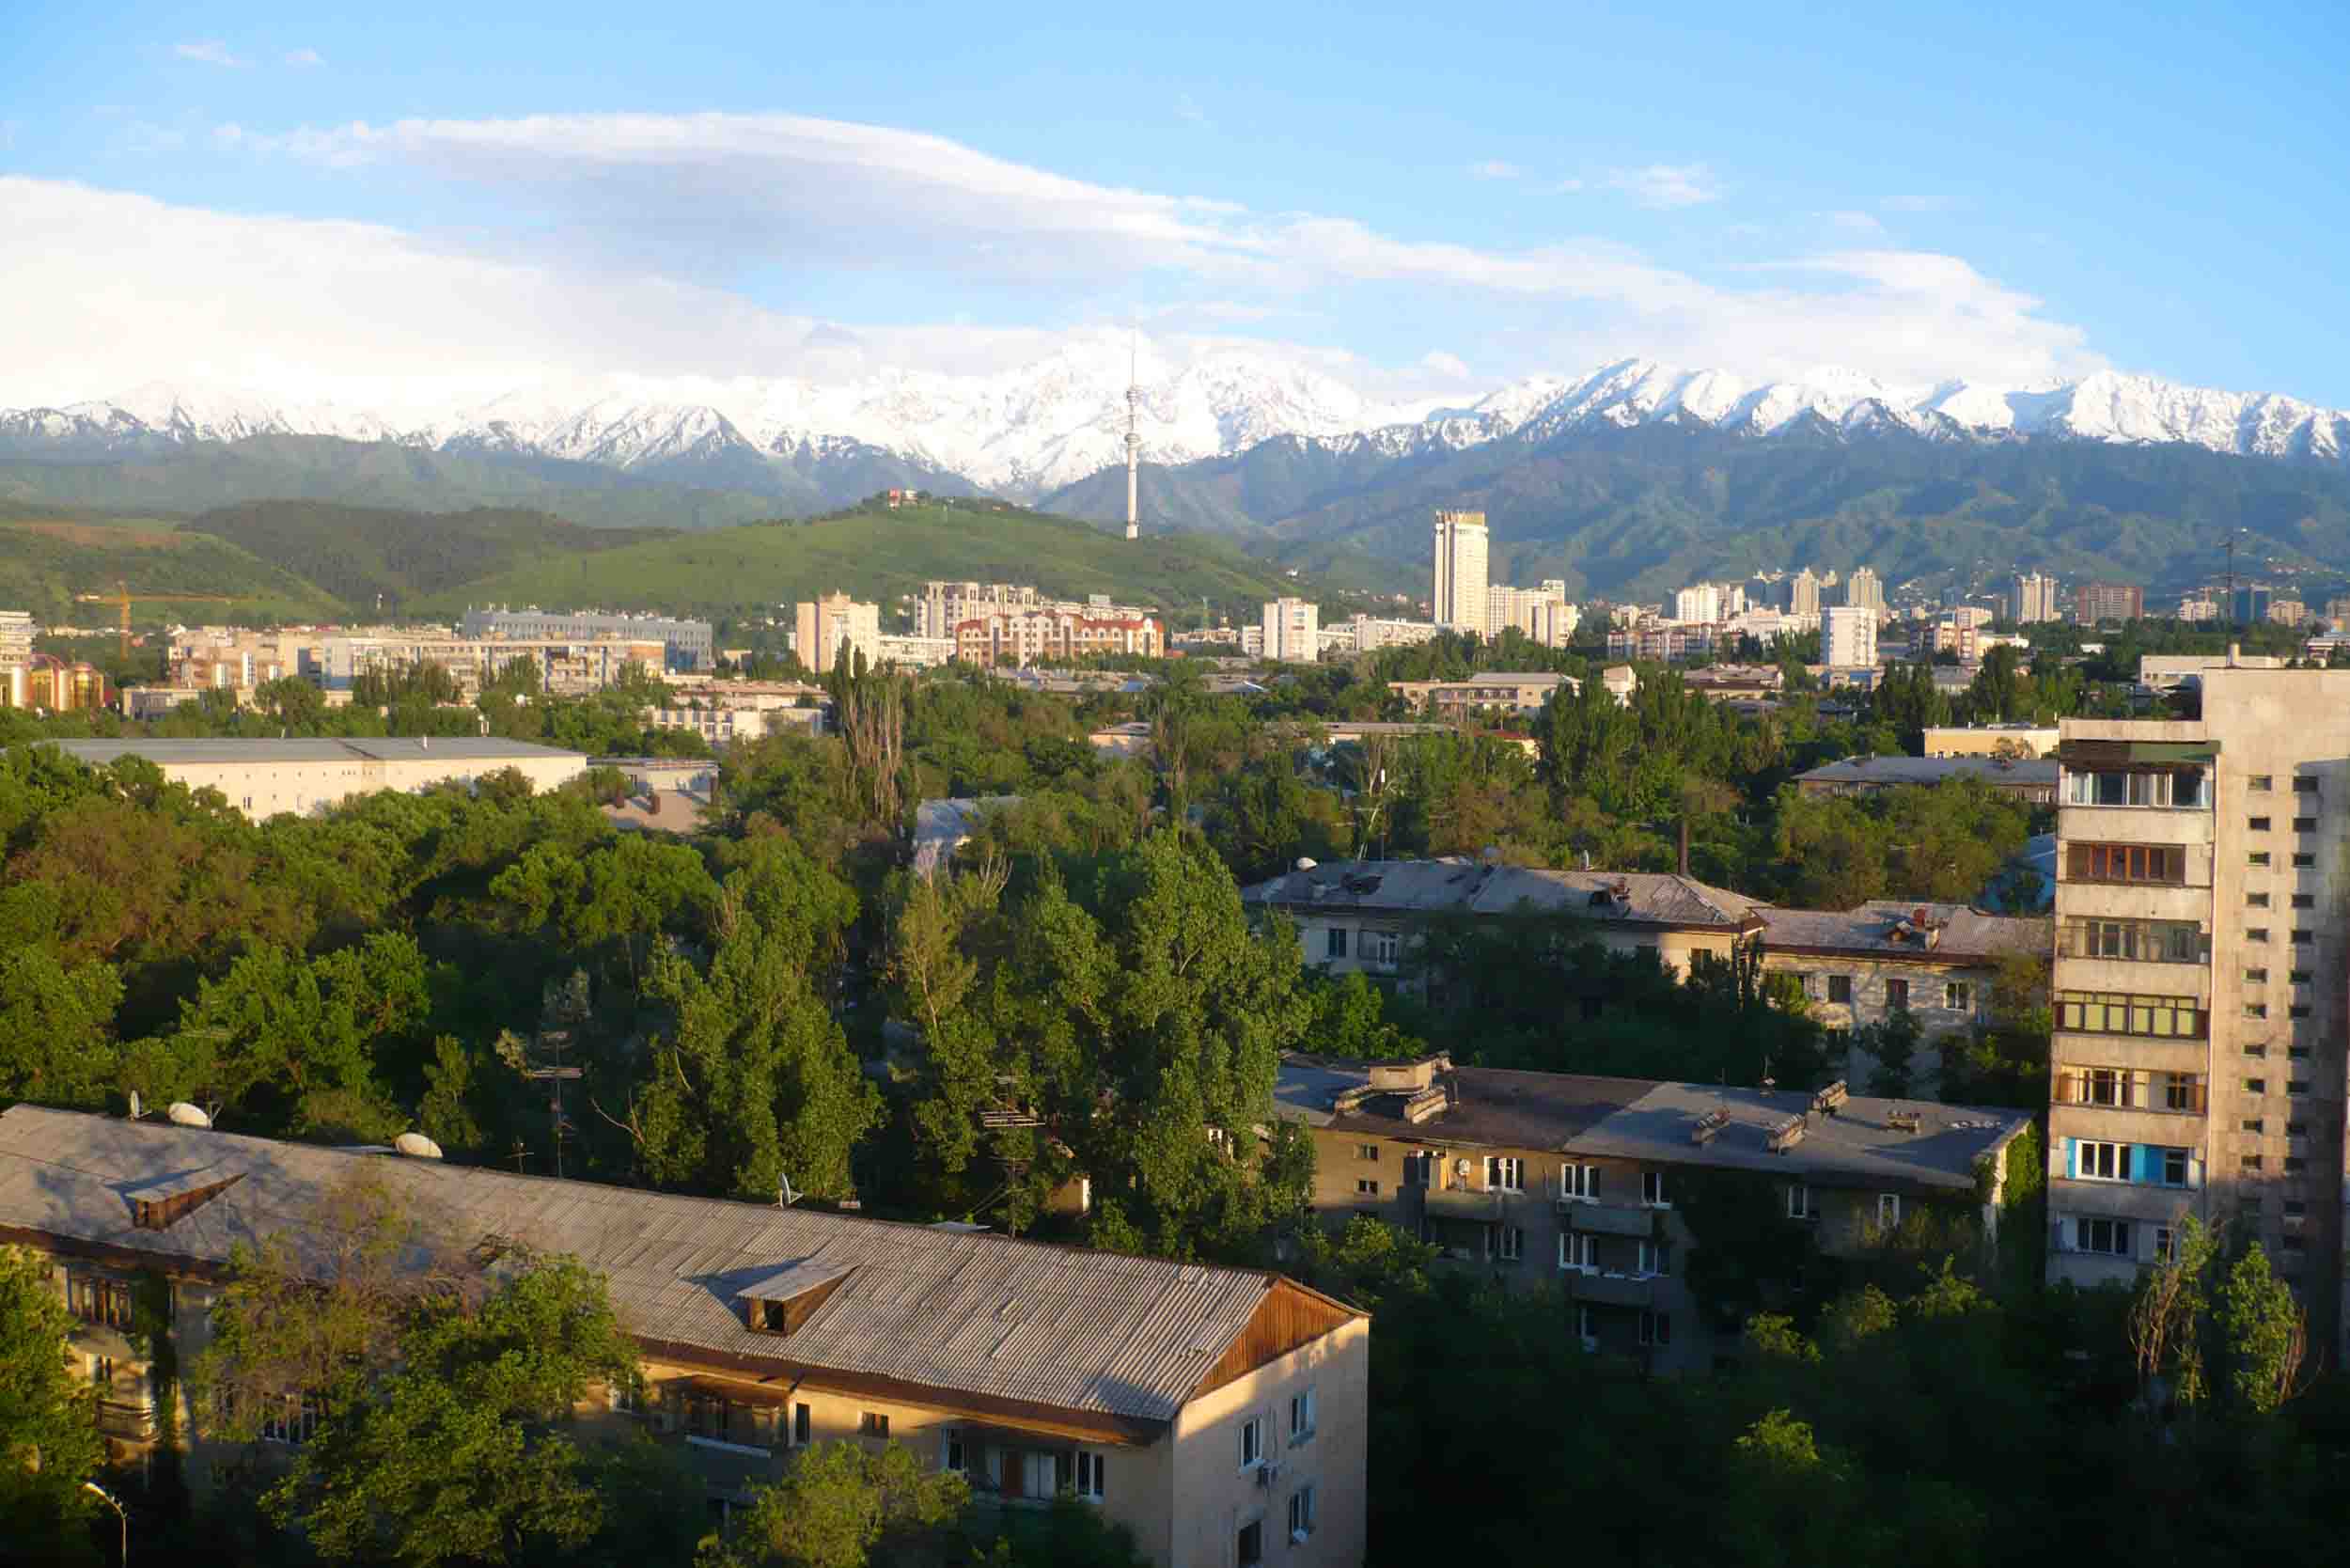 Almaty; the perfect base for a Central Asian adventure!